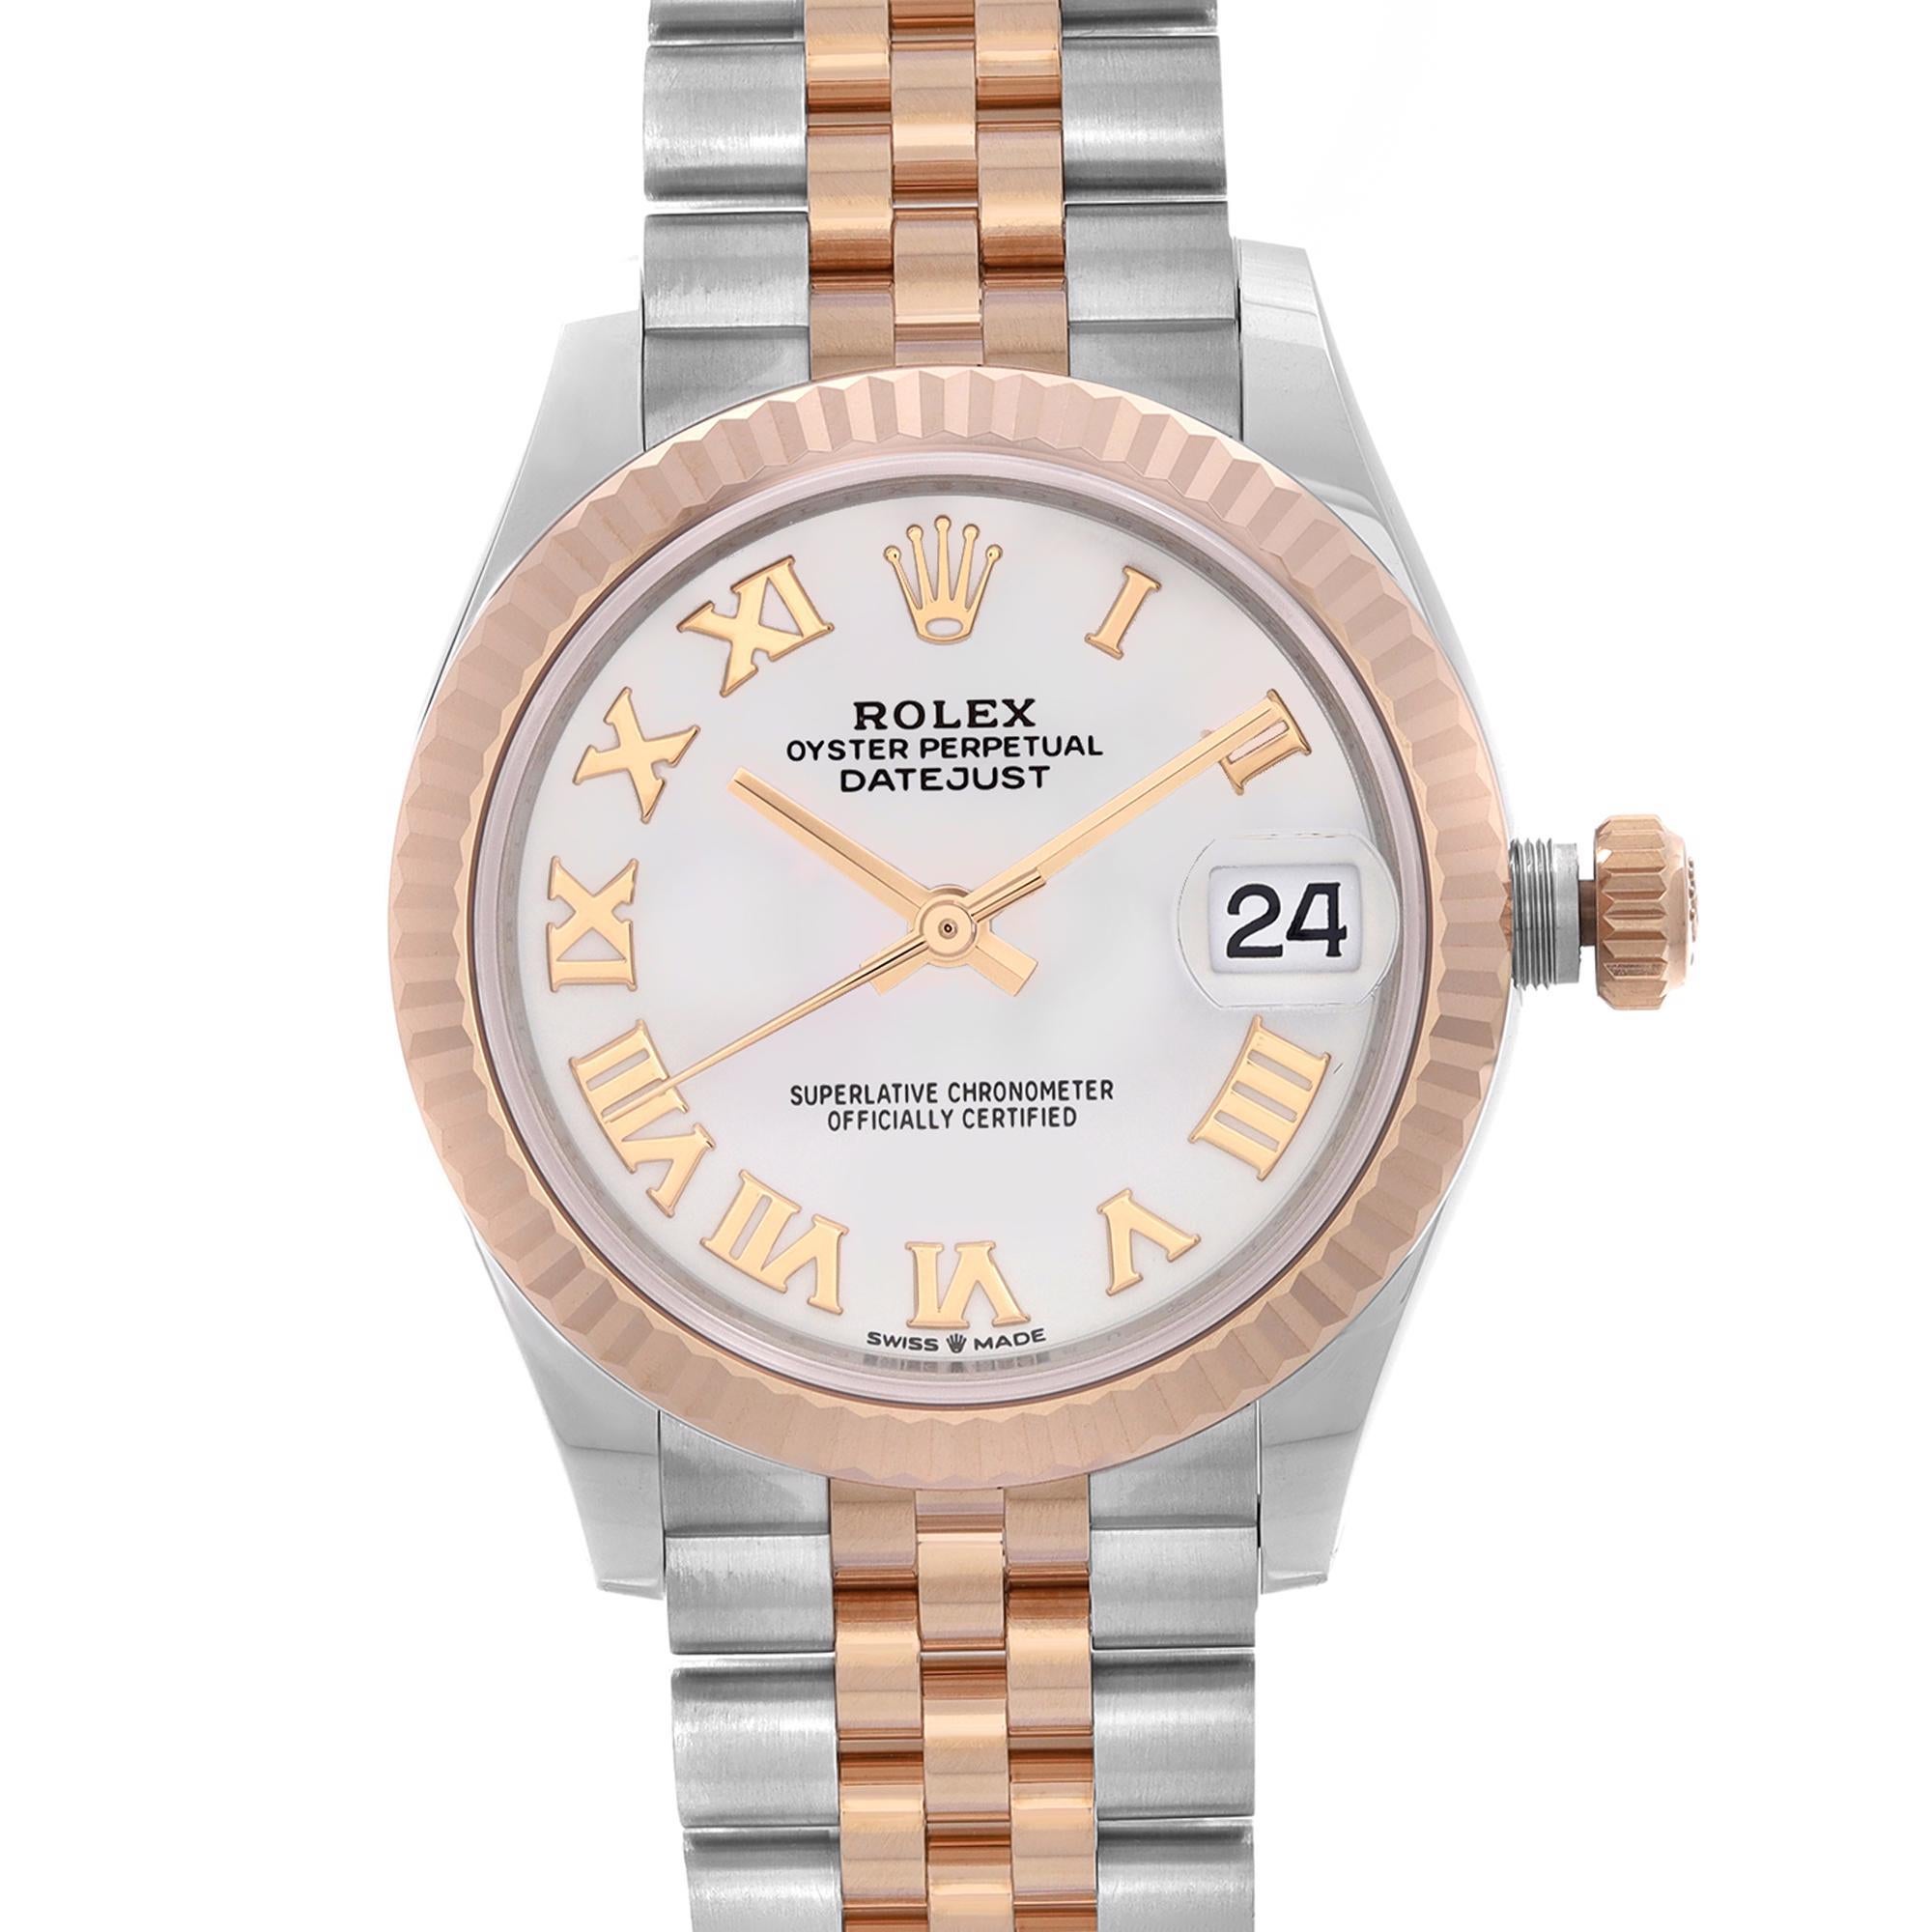 Unworn 2021 Card Rolex Datejust 31 18K Rose Gold Steel Jubilee White Dial Ladies Watch 278271. This Beautiful Timepiece Is Powered by an Automatic Movement and  Features: Stainless Steel Case with a Stainless Steel and Rose Gold Jubilee Bracelet,